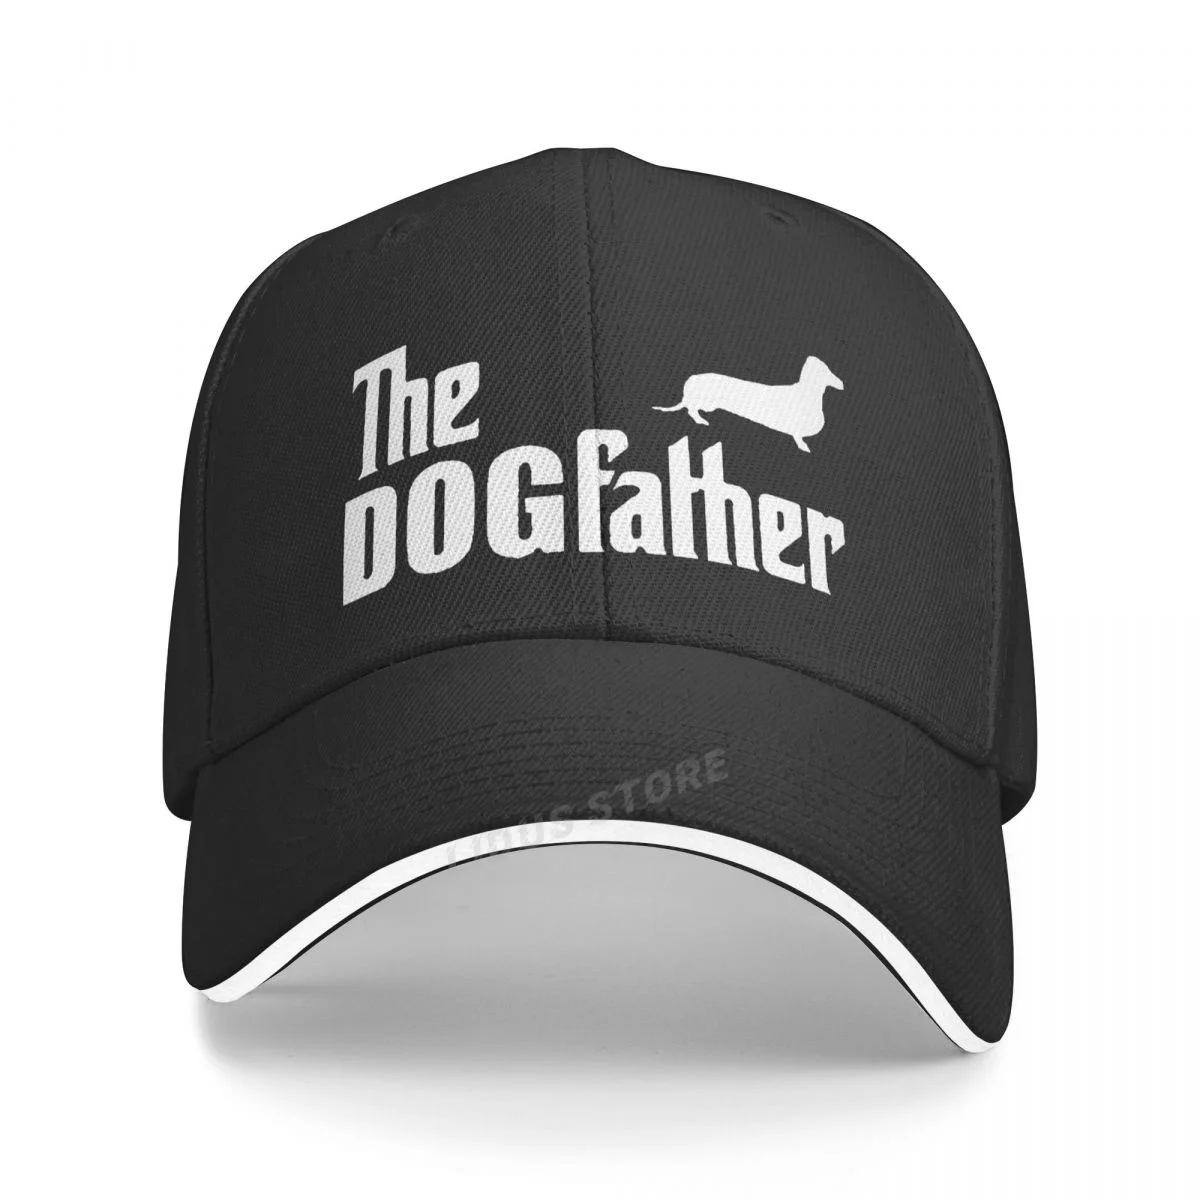 Dachshund Sausage Dog The Dogfather Funny Baseball Cap Men Summer Casual Dad Hat Fashion Unisex Adjustable Hip Hop Caps